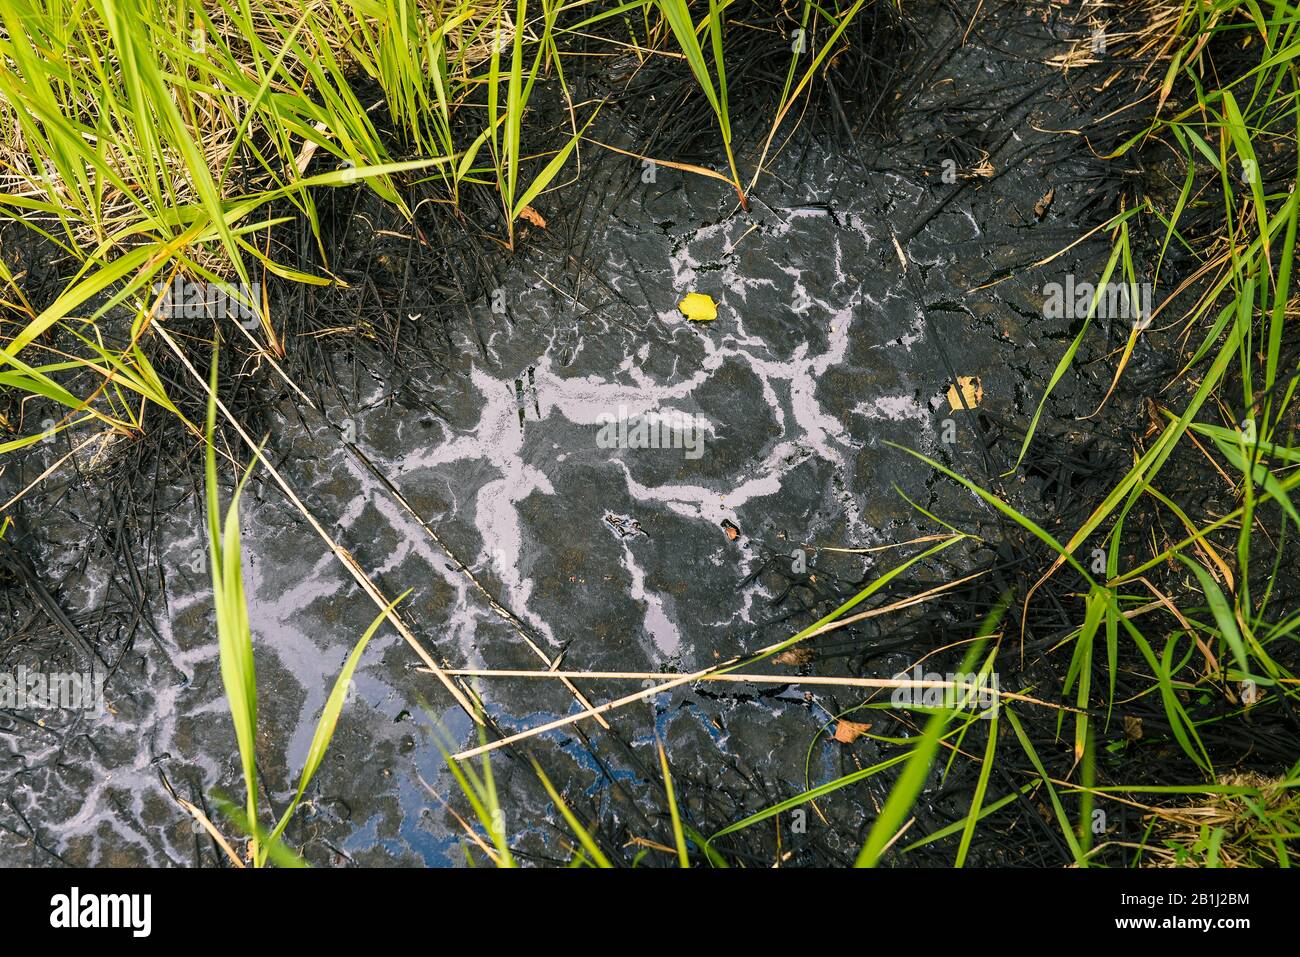 Spilled oil on the green grass. Oil leak and nature killed by toxic chemicals. Dangerous black liquid Stock Photo